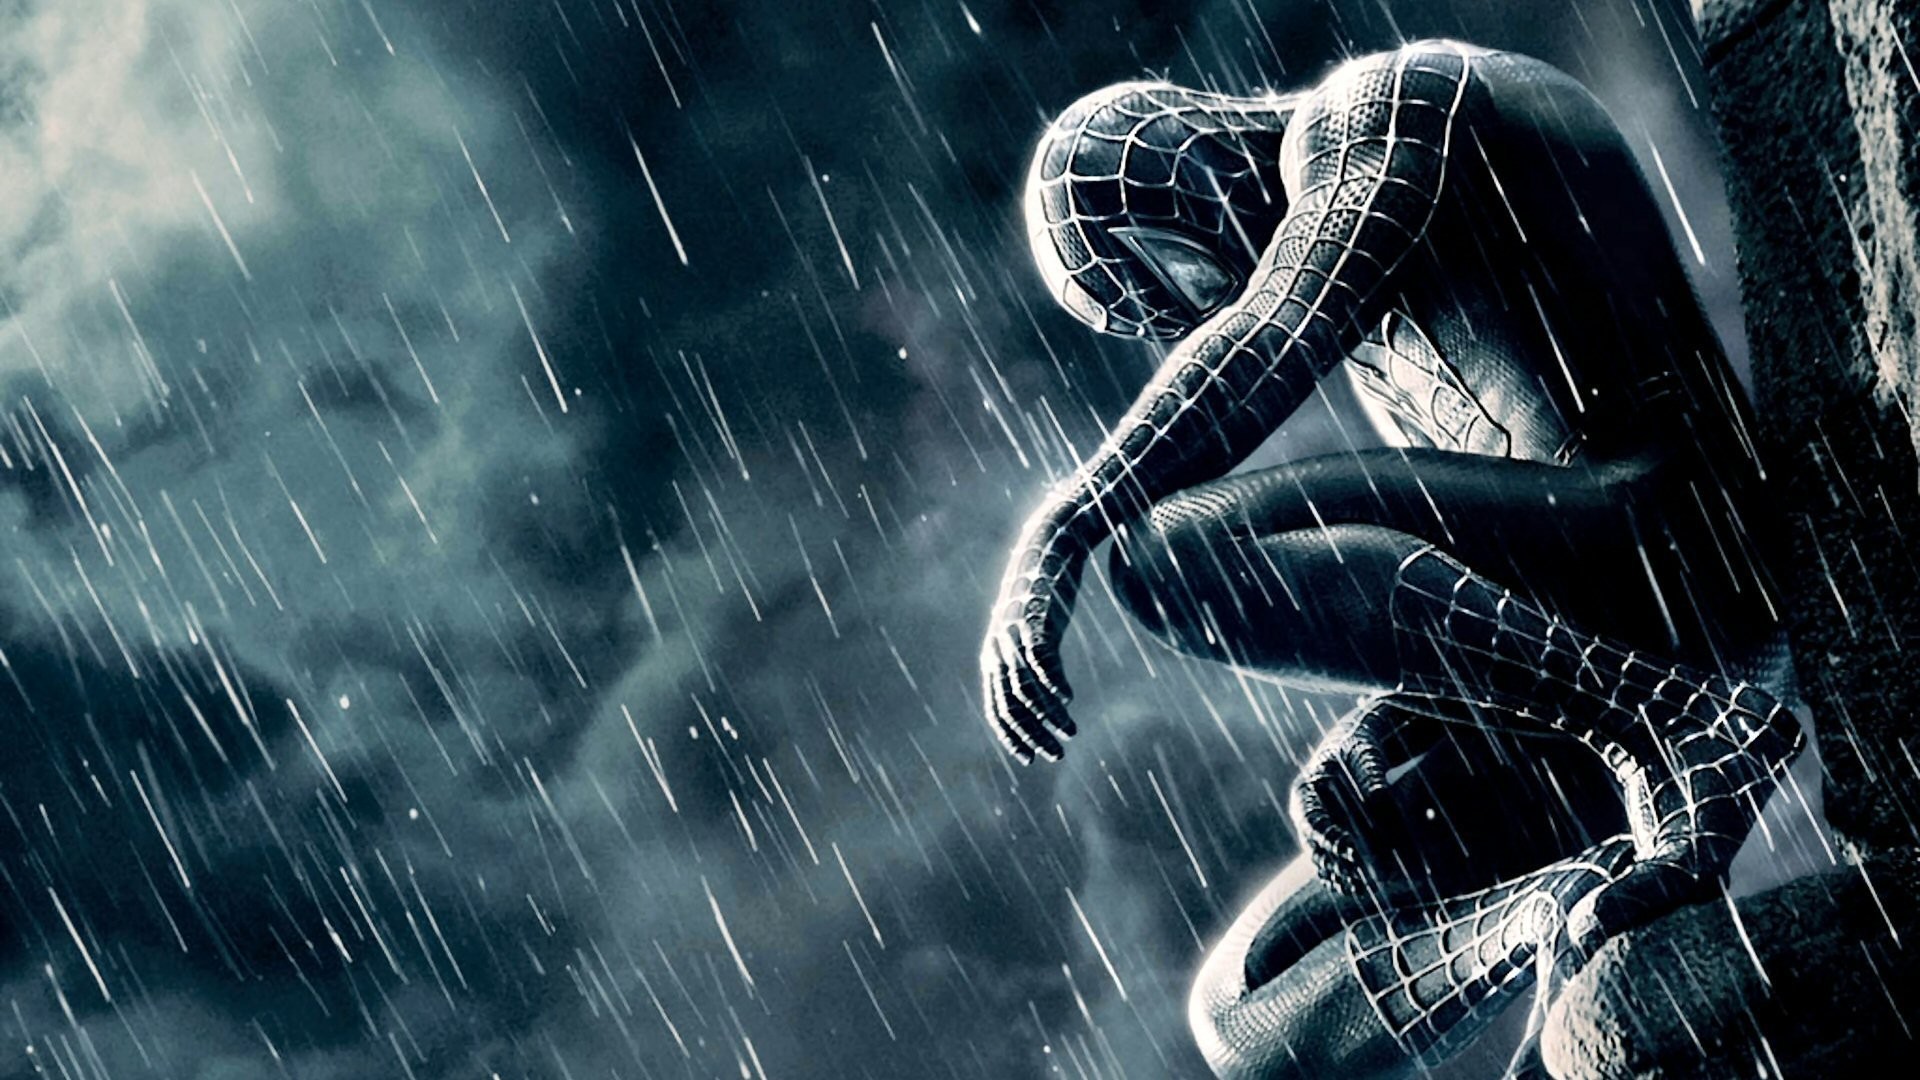 1920x1080 Spiderman Wallpapers In HD Group 1600Ã1200 Wallpapers Of Spiderman 4 (45  Wallpapers)